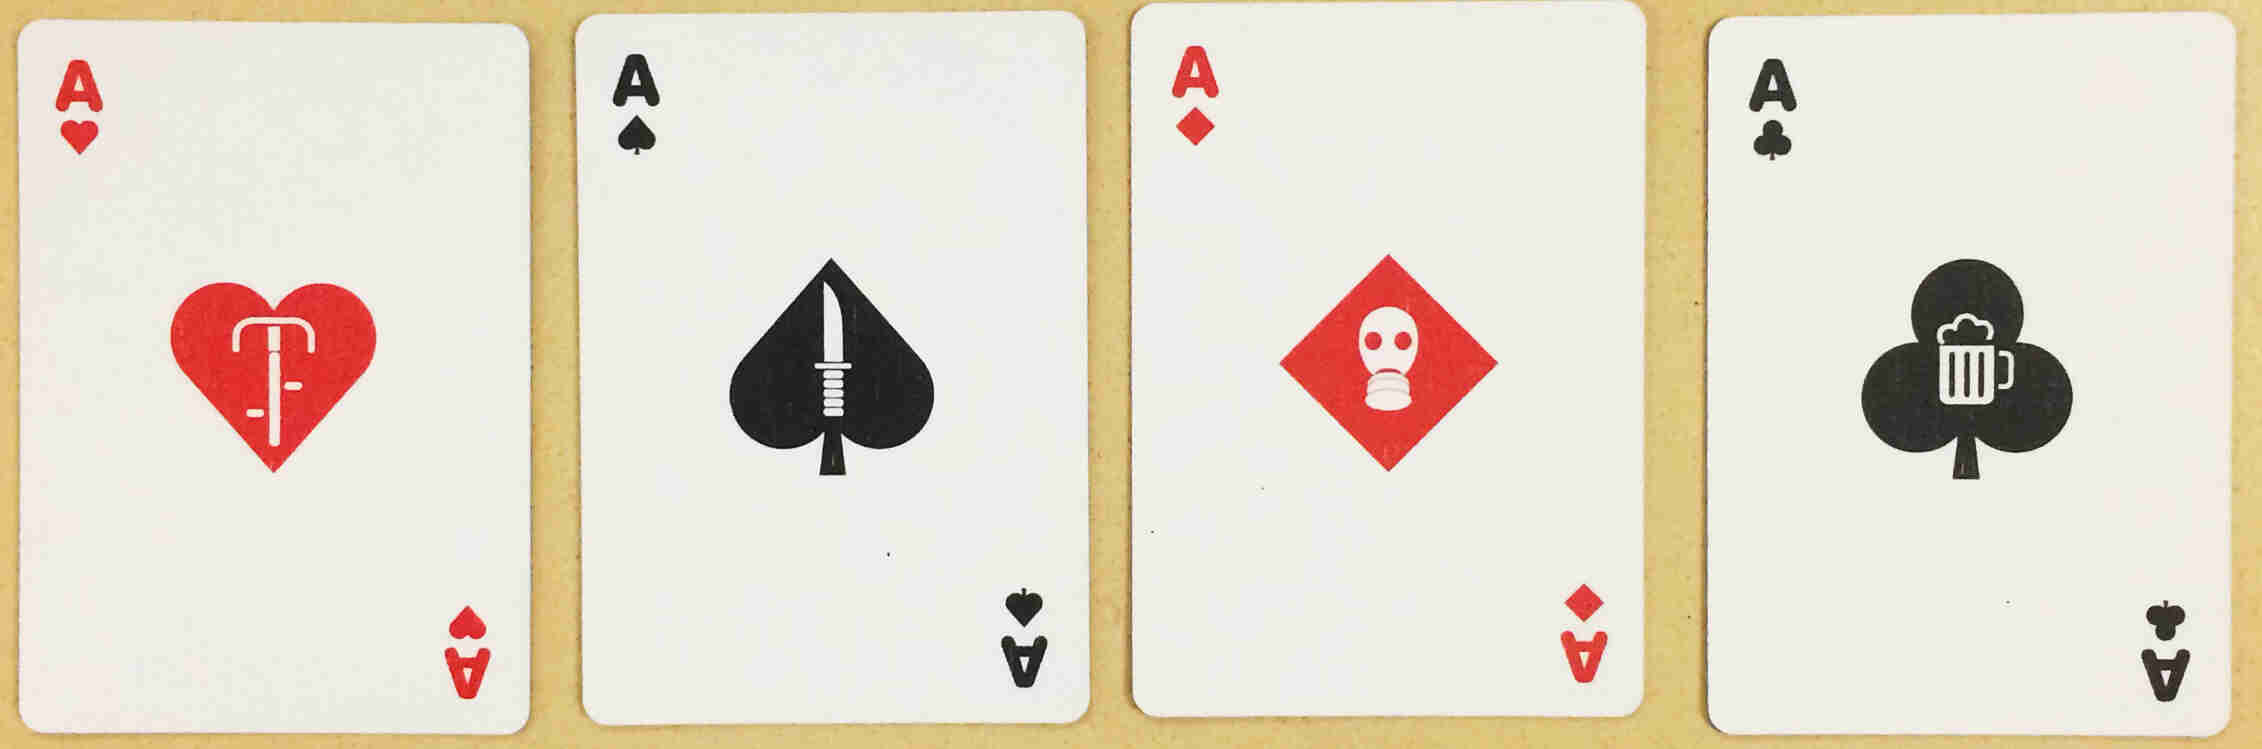 Downward view of two Surly playing cards - One is an Ace of hearts and the other an Ace of spades